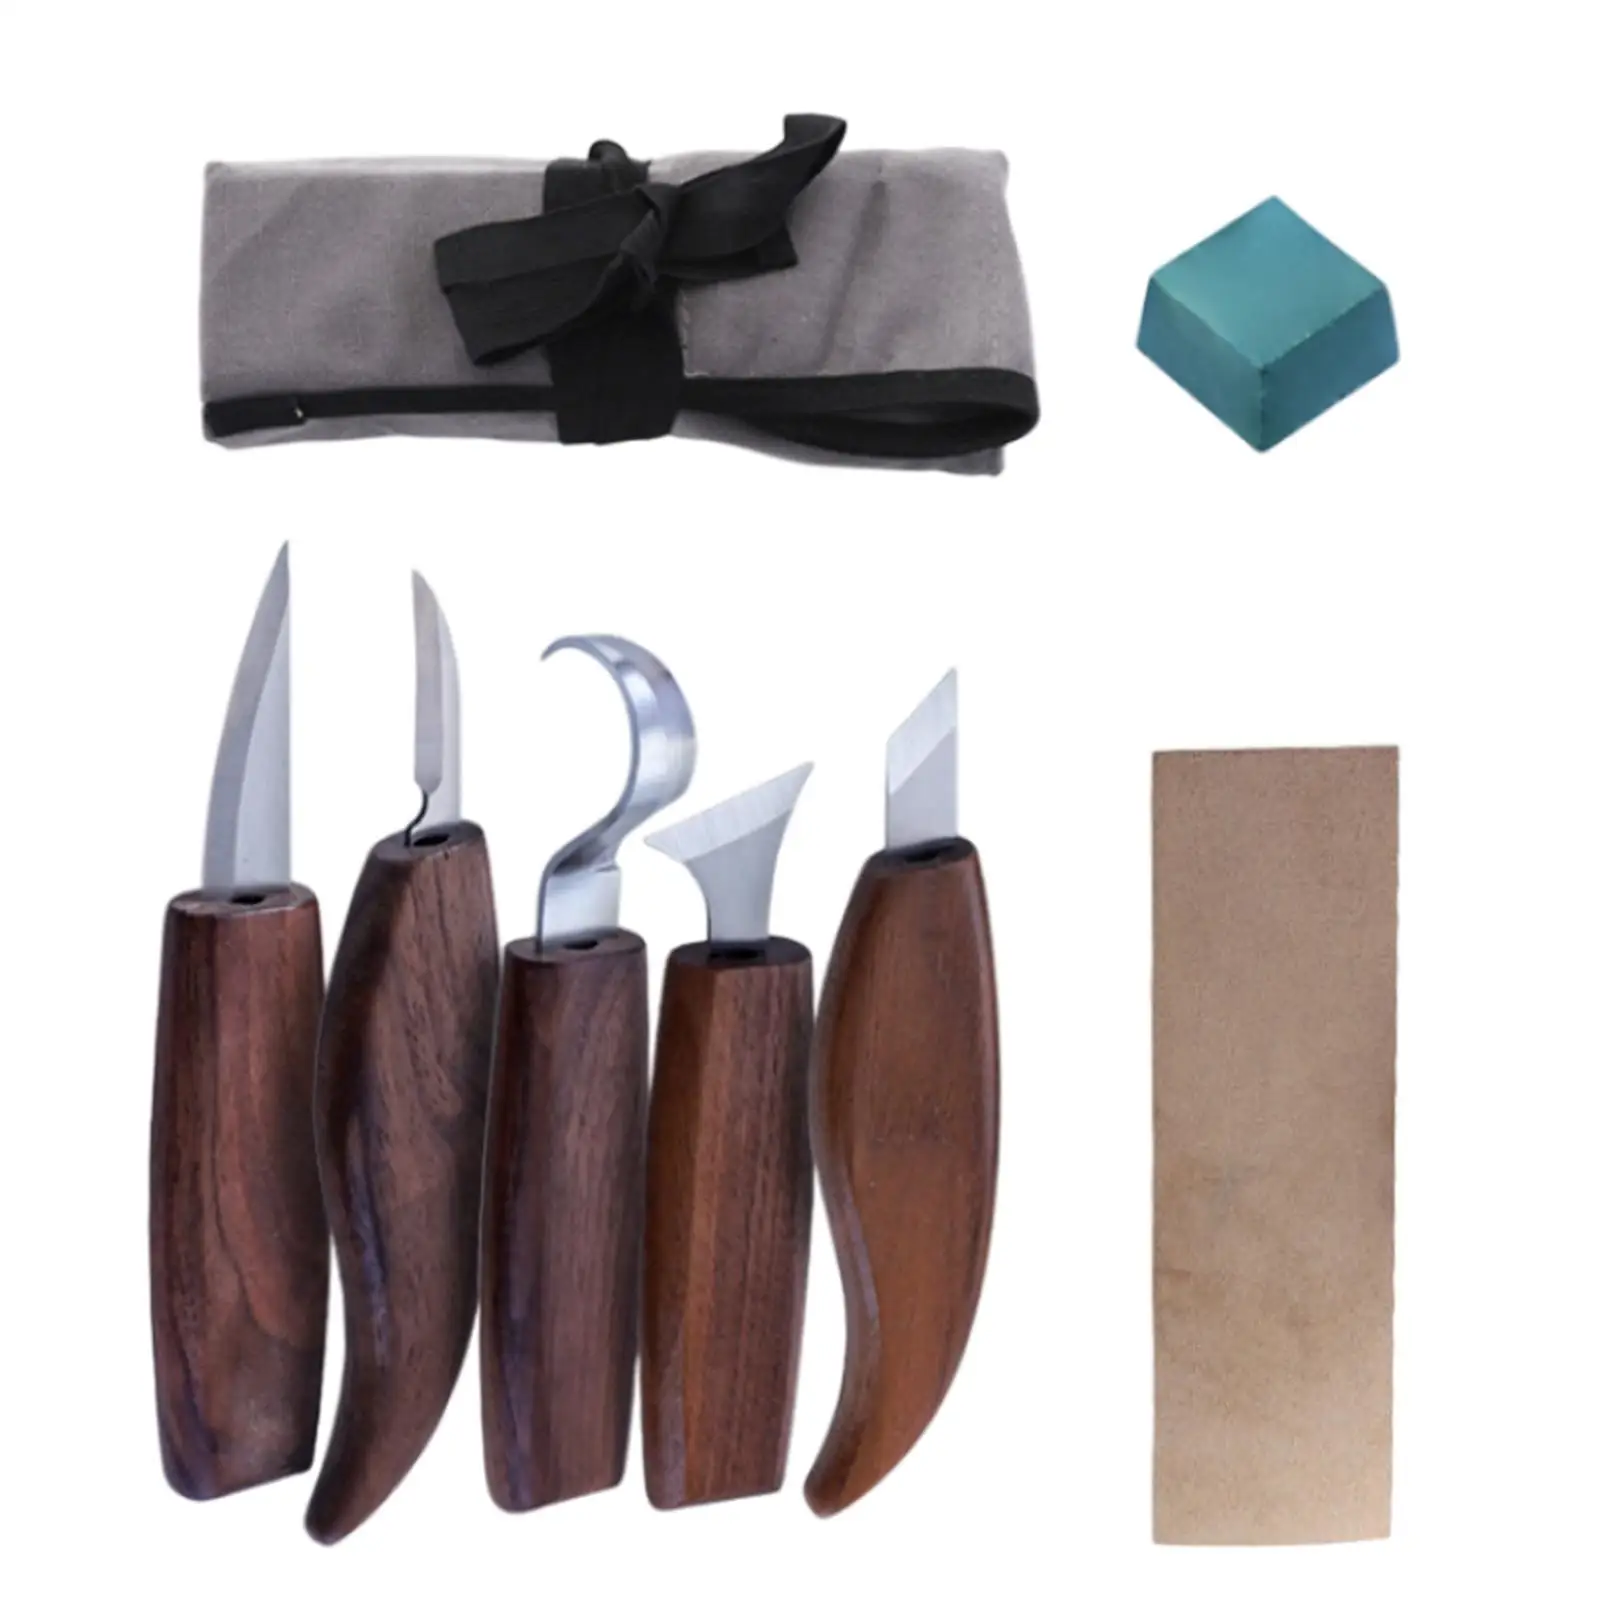 8Pcs Wood Carving Kits Durable Fine Carving Beginners Whittling Kits Hand Carving Knife Set for Paper Carving Plaster Carving